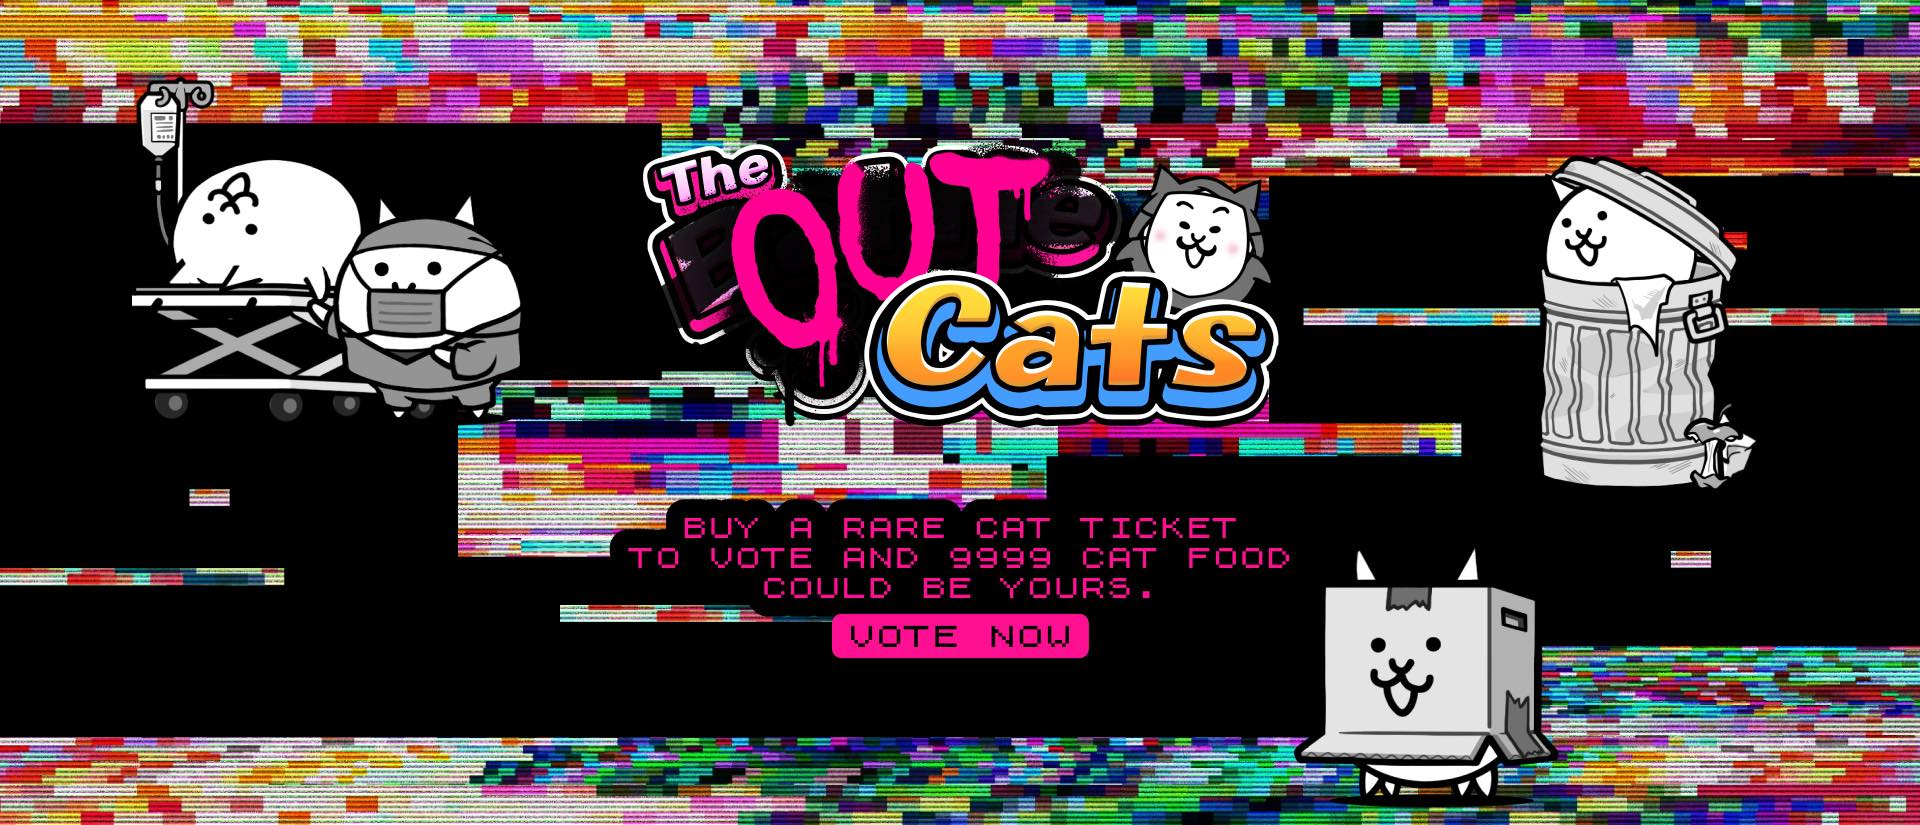 Interview: We Chat To The OutCats About Which Of Them You Should Vote For